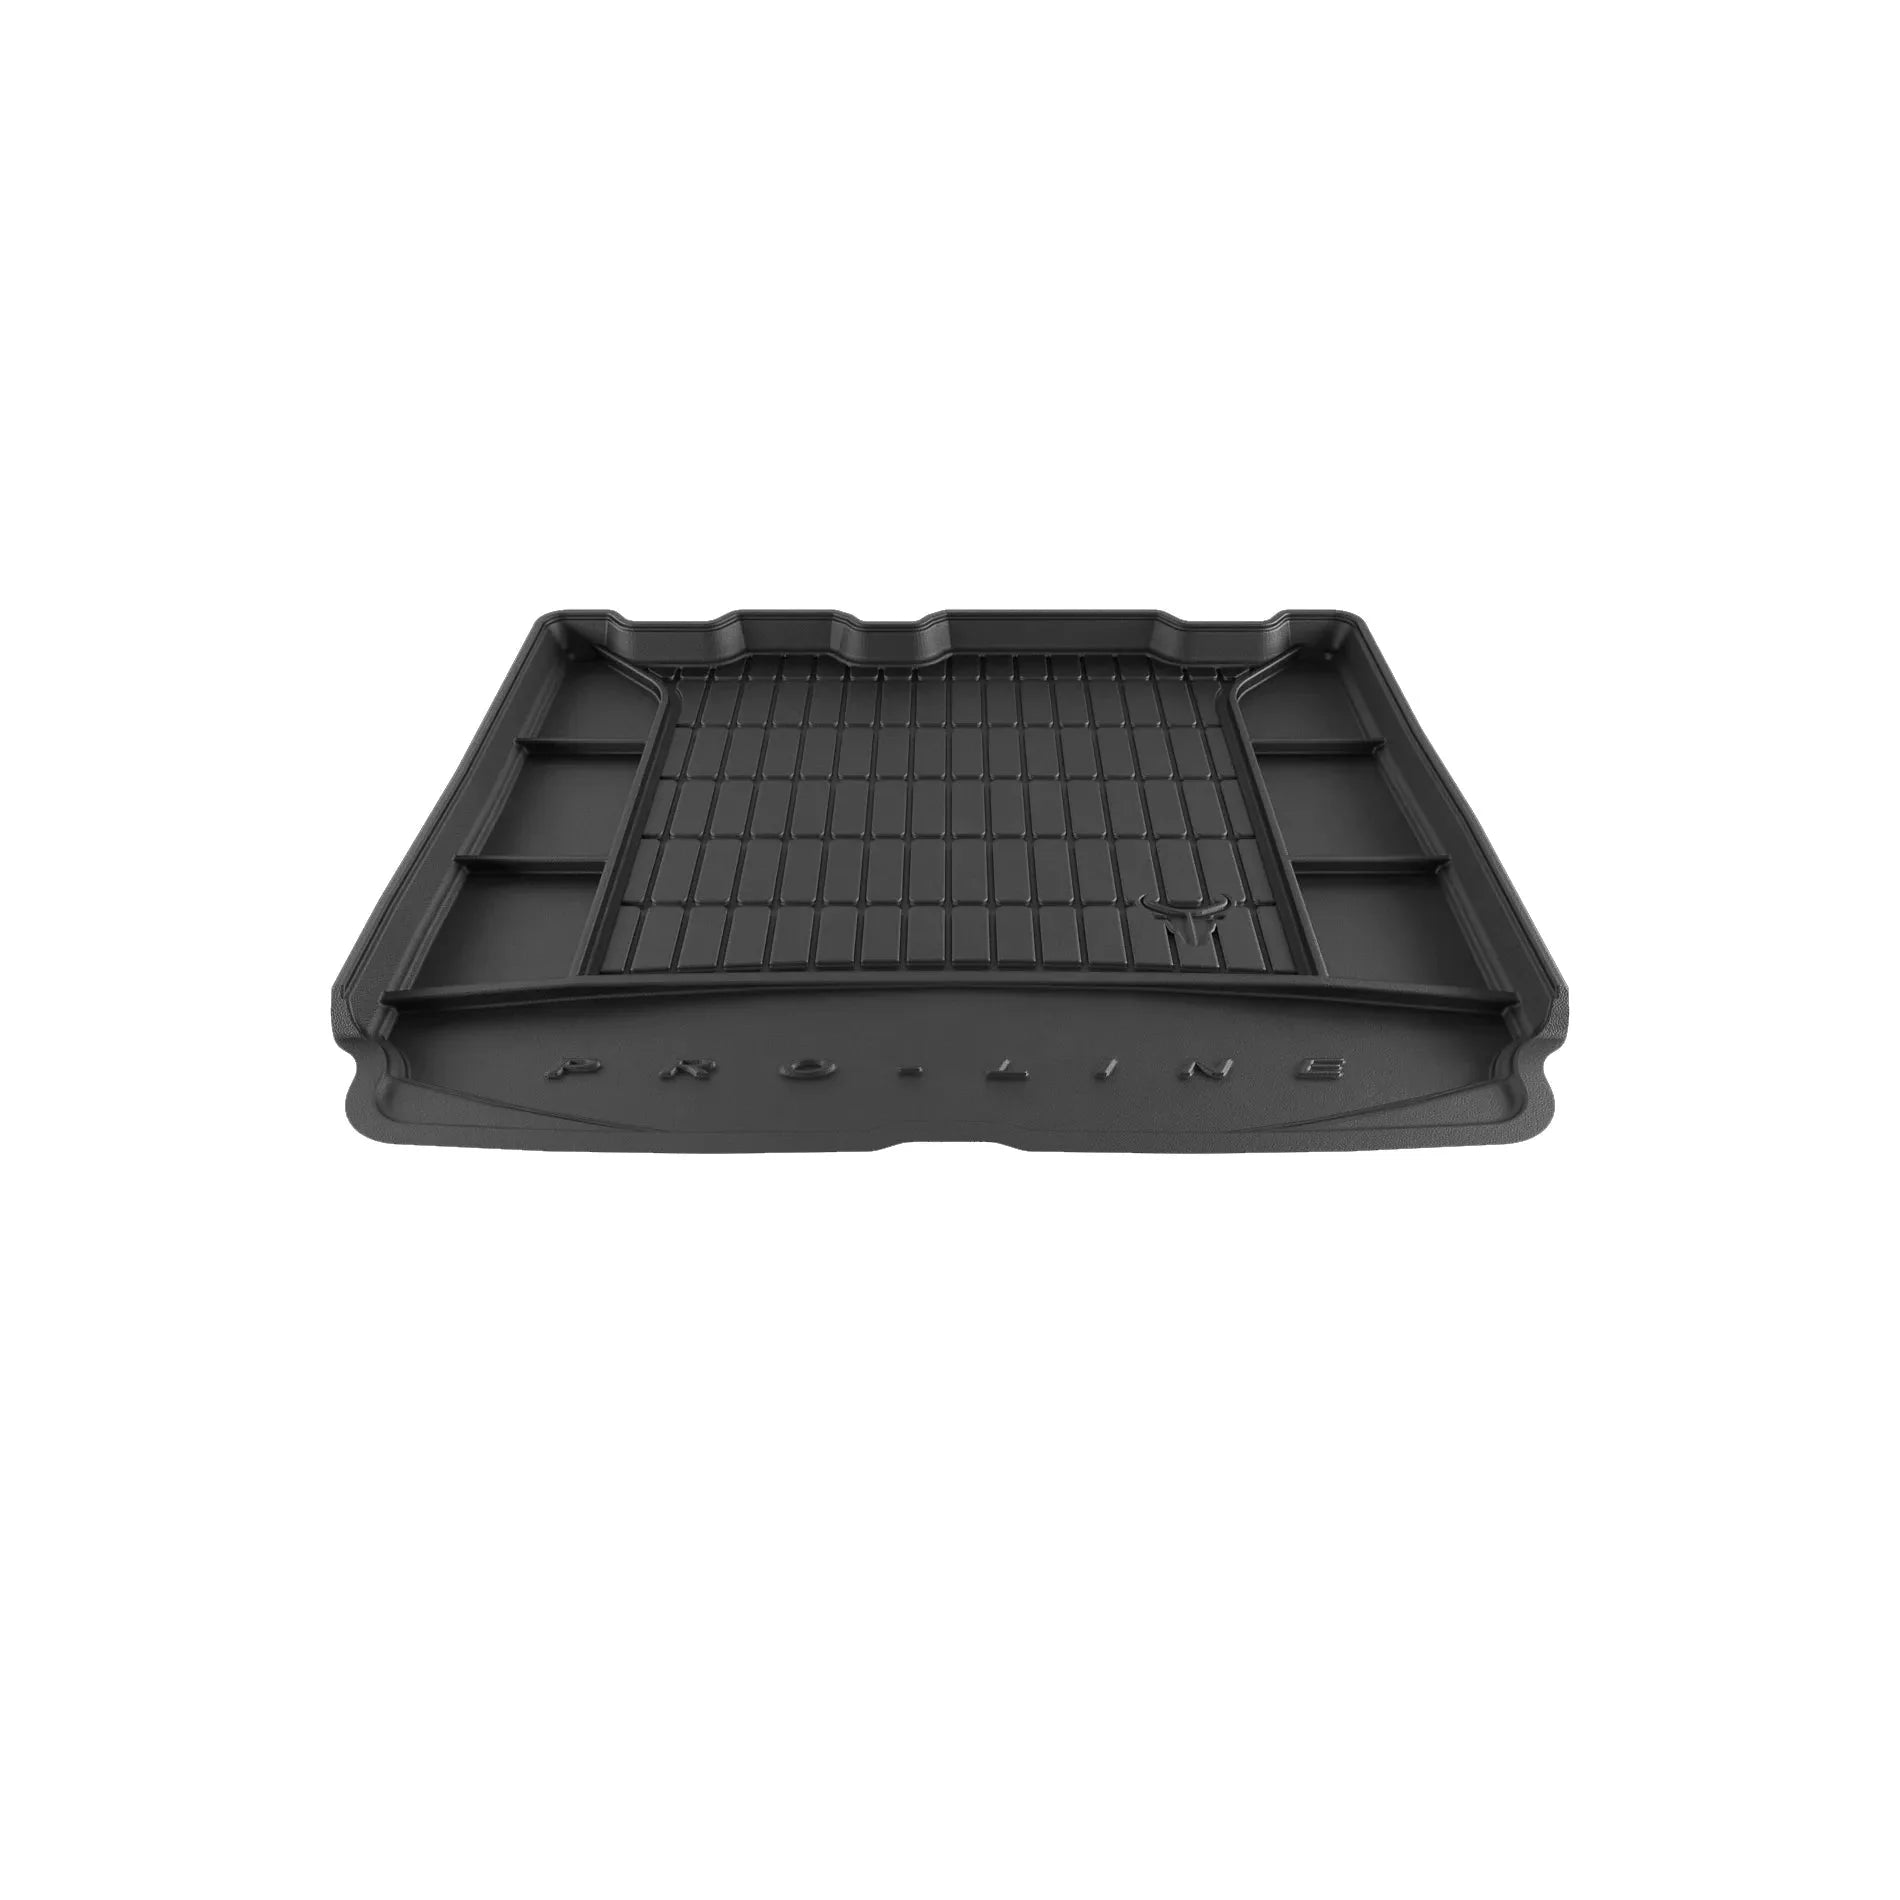 Tailored Car Boot Liner for Ford - Protect Your Boot from Dirt and Damage - Green Flag vGroup